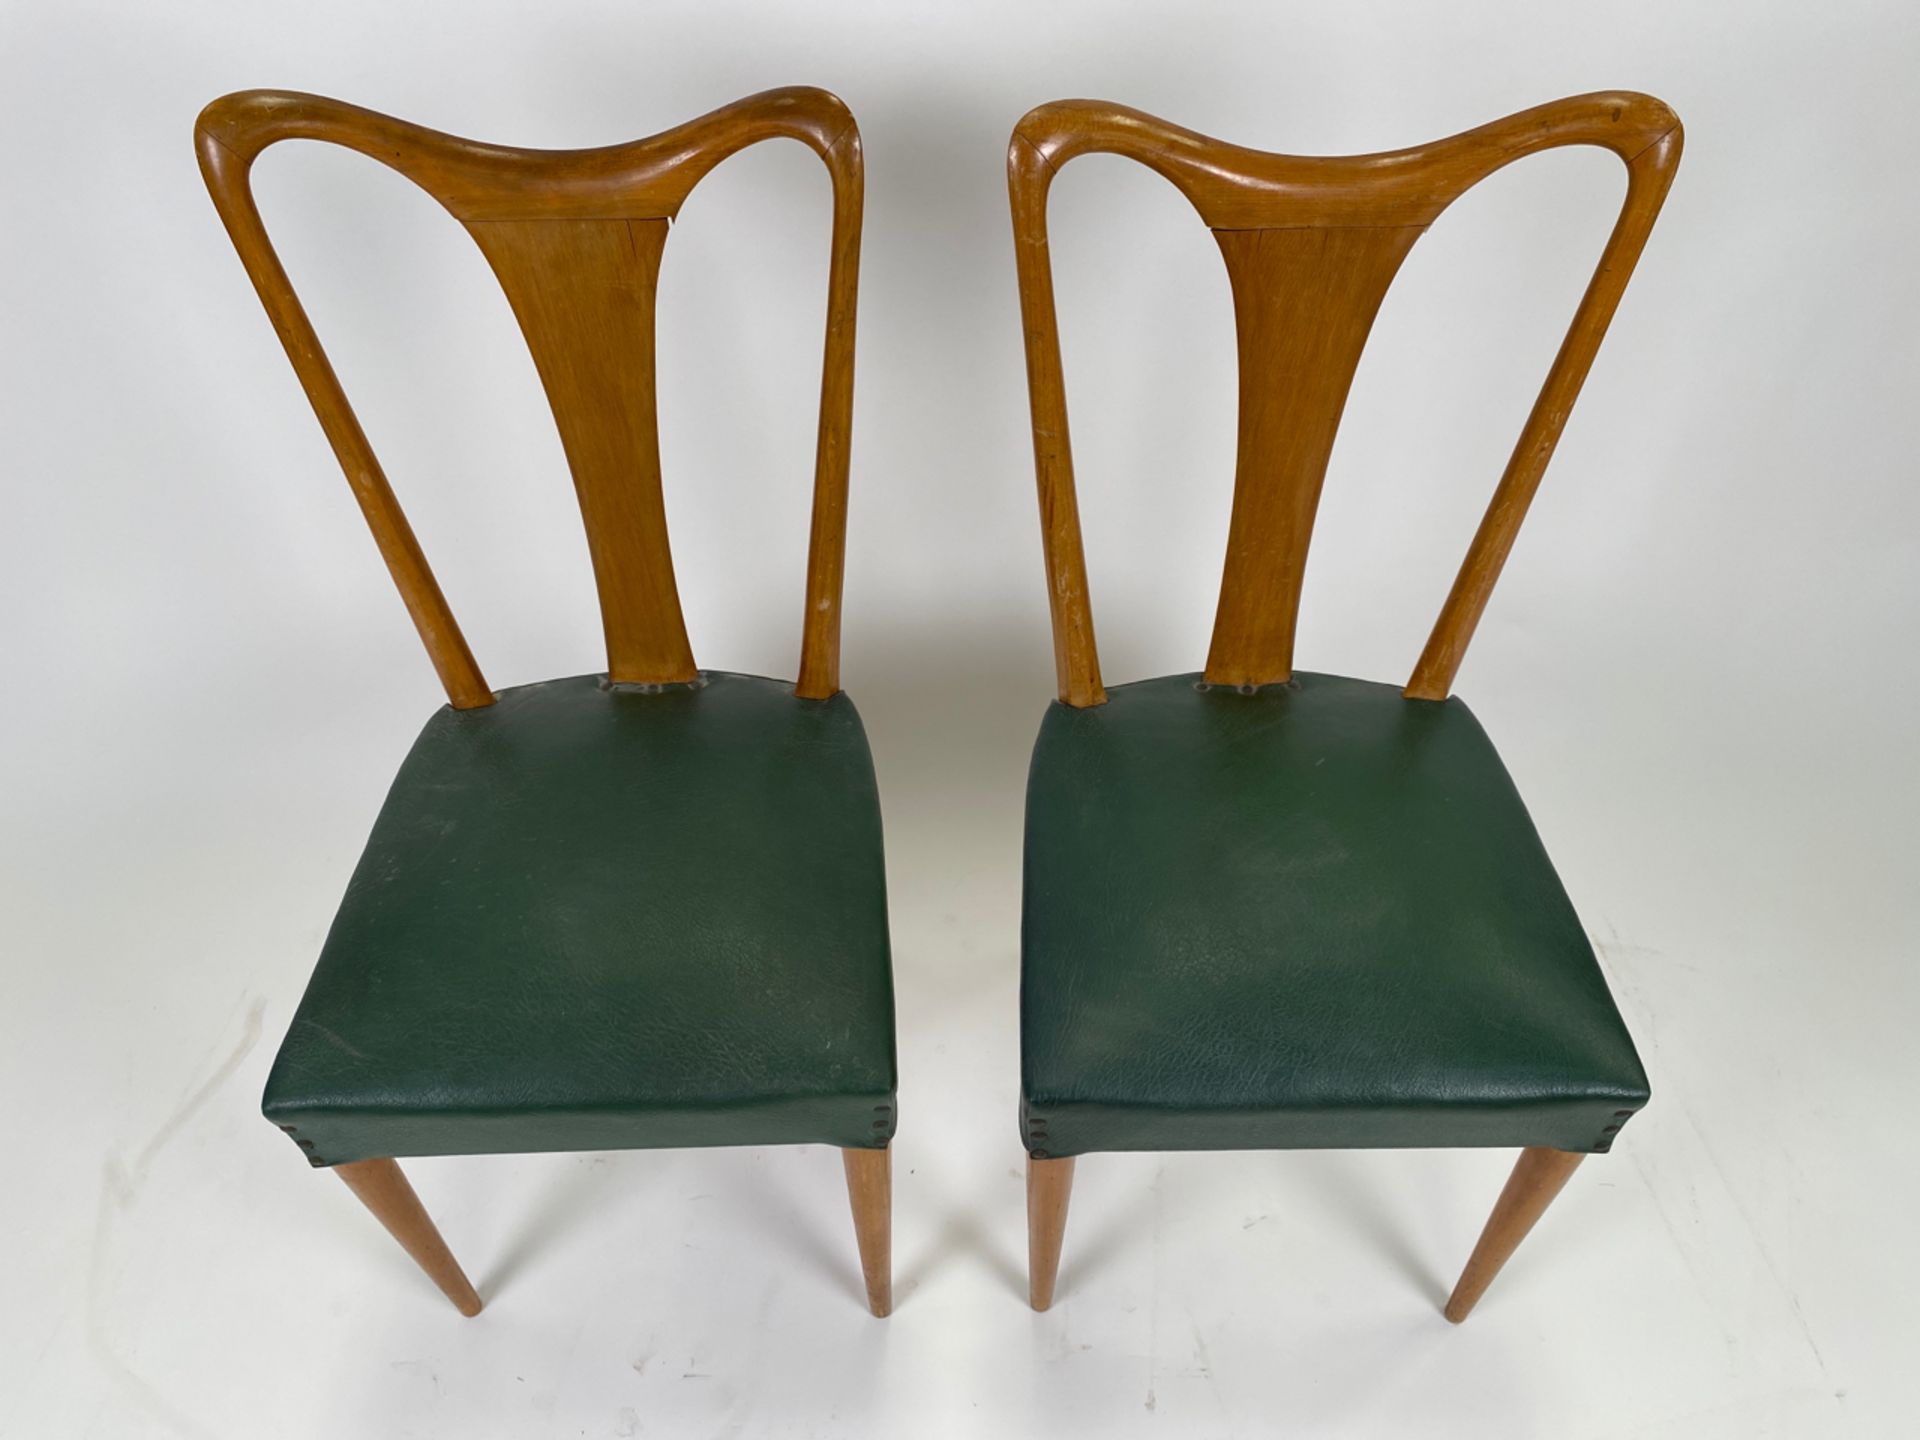 Pair of Ico Parisi Mid-Century Leather Chairs - Image 3 of 8